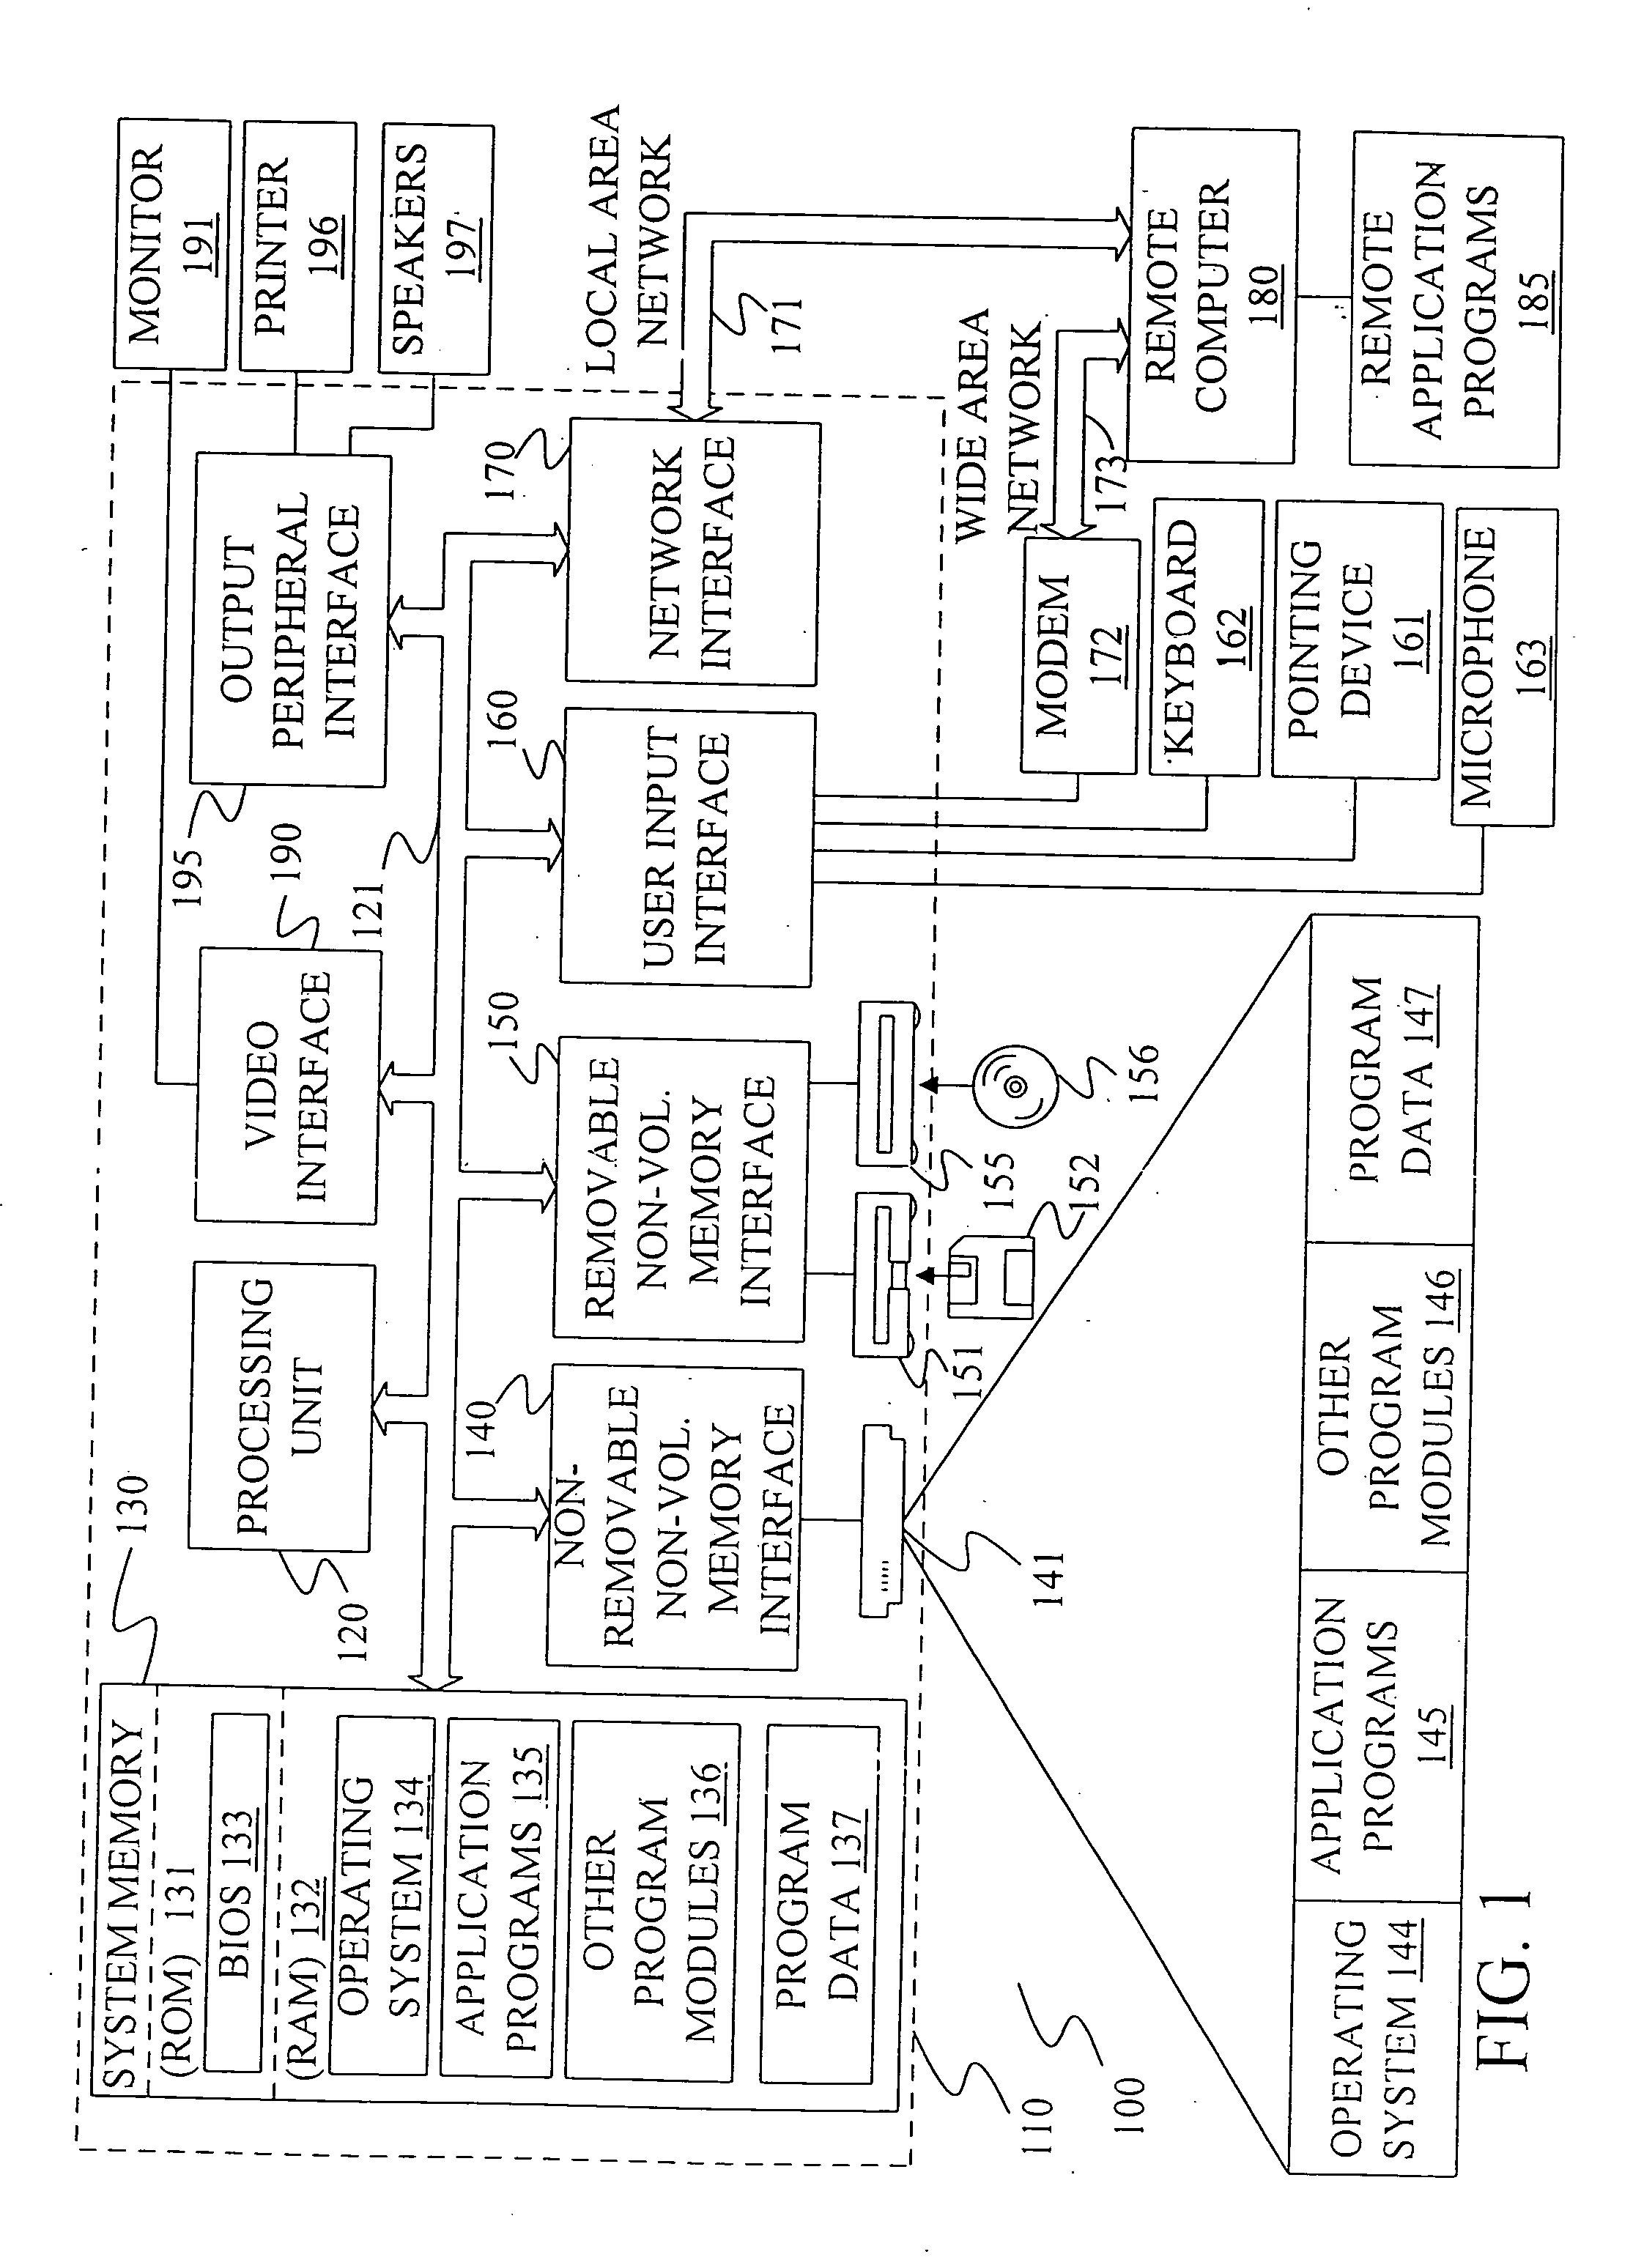 Method and apparatus for speech synthesis without prosody modification